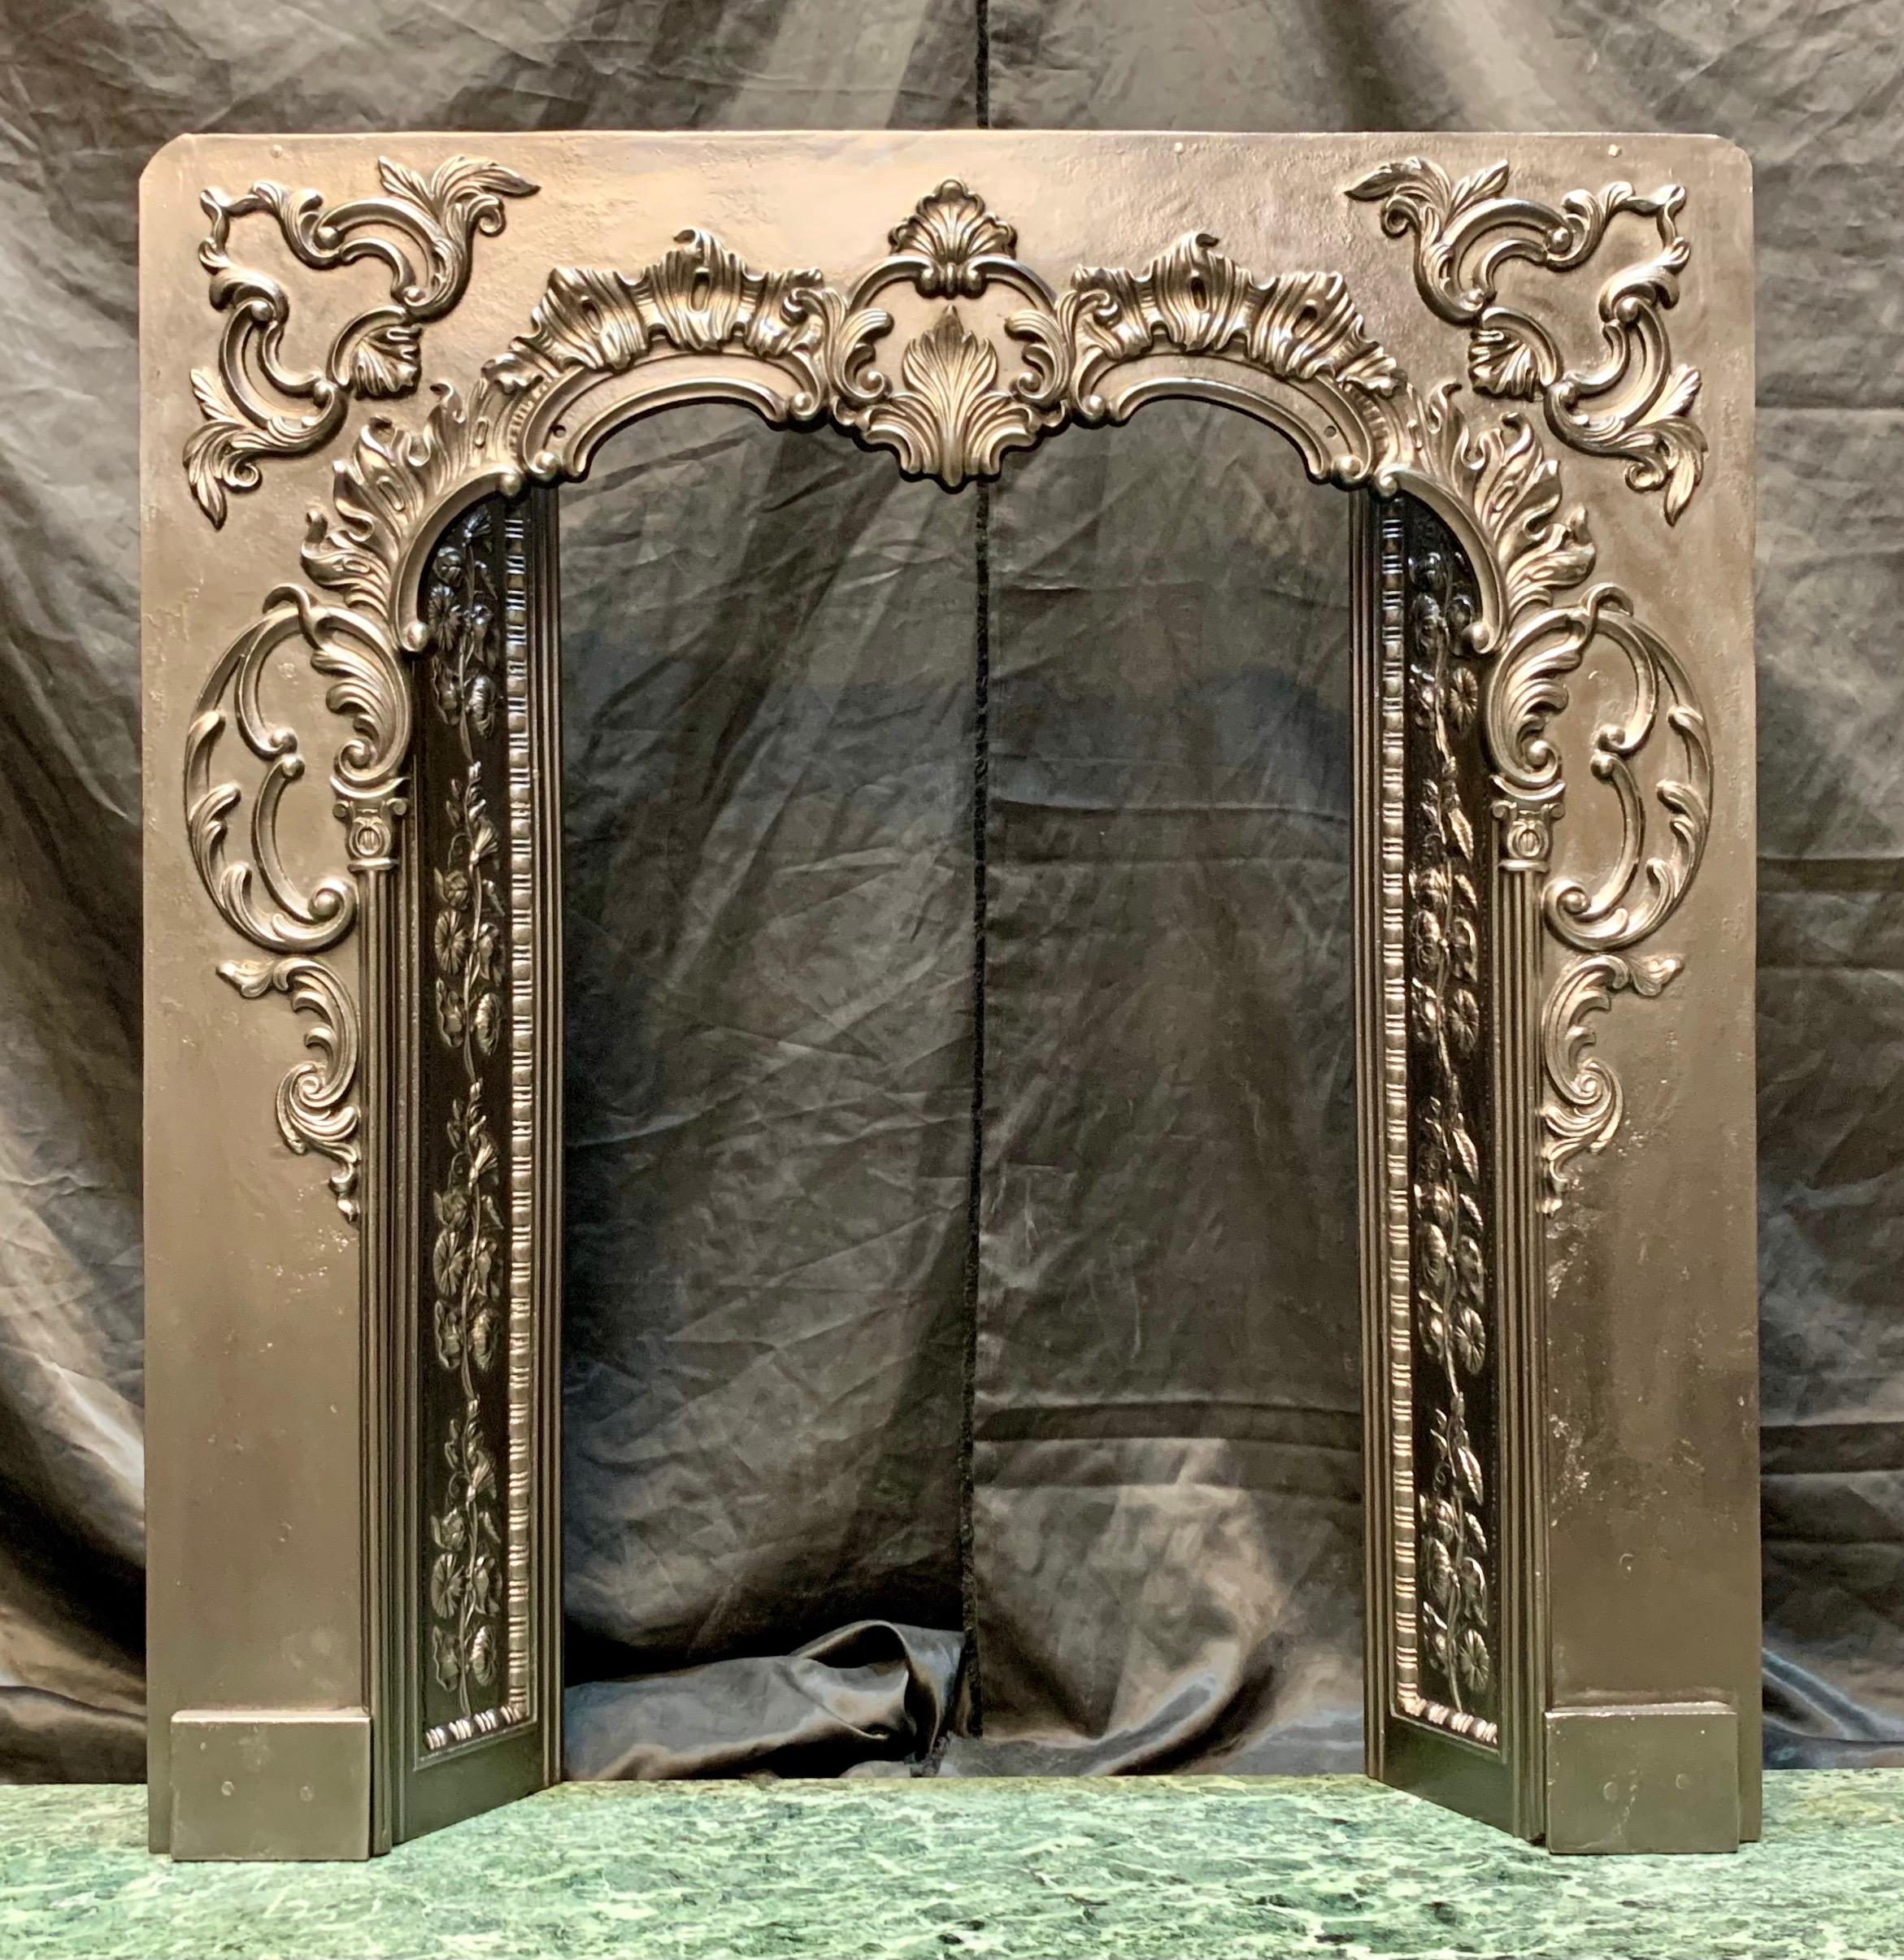 An original and rare Scottish probably (Carron of Falkirk) Georgian Cast Iron fireplace insert of favourable proportions in the British Rococo manner. A generous outer plate with high relief folate and floral embellishment throughout, centred by a